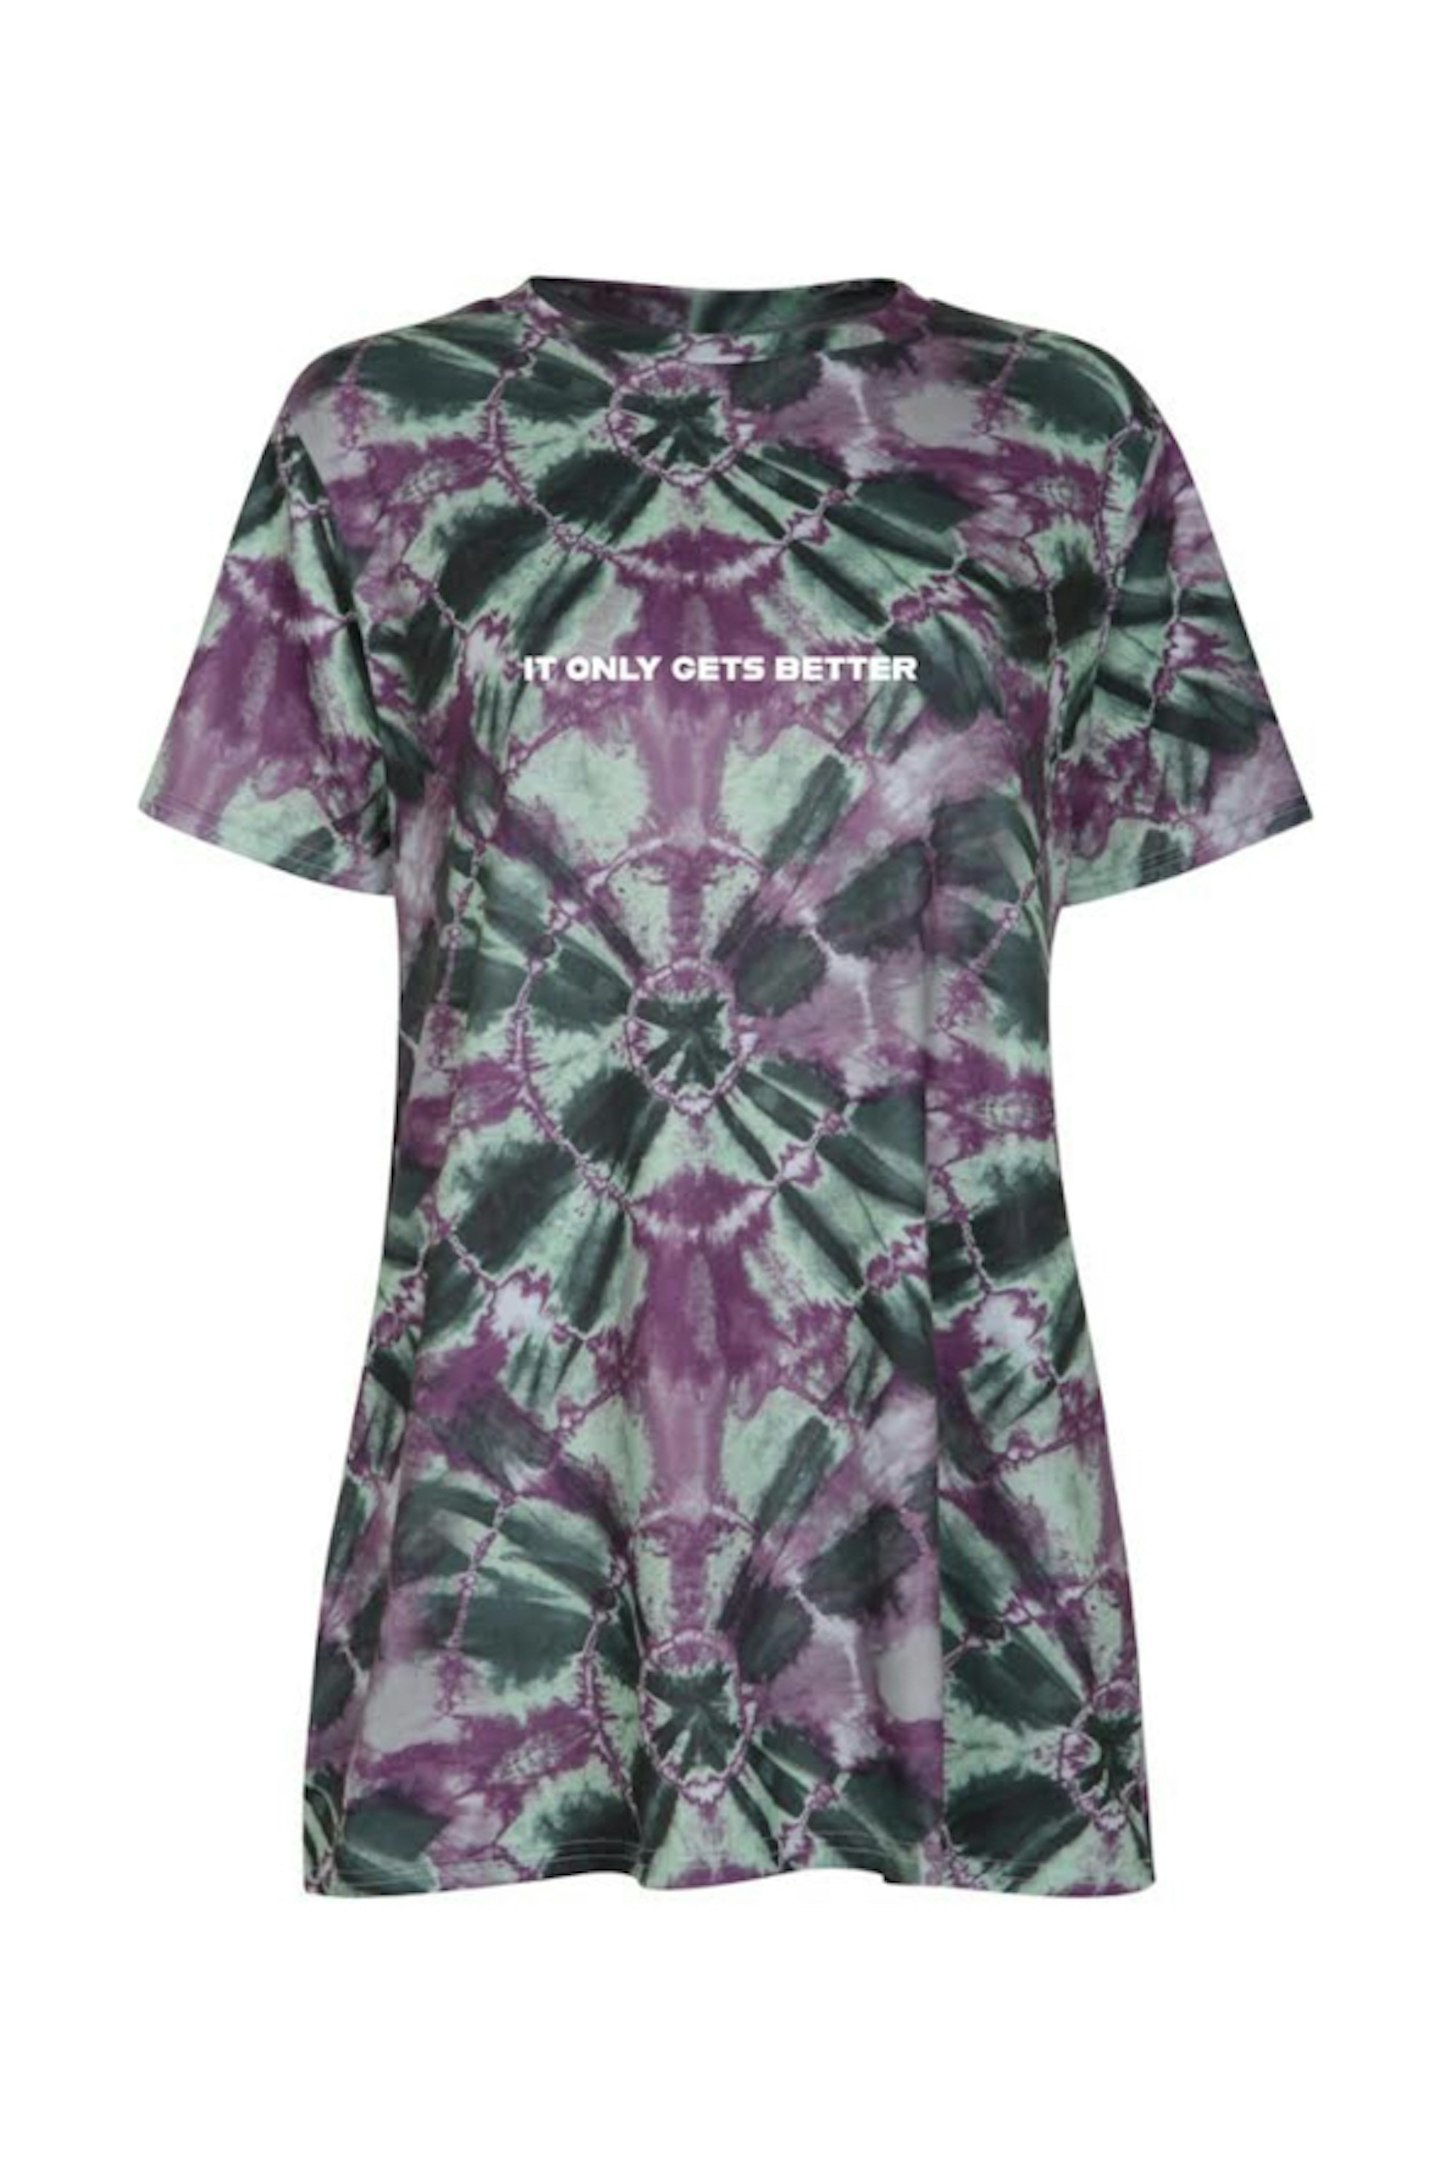 Cinta The Label, It Only Gets Better Tie Dye T-Shirt, £39